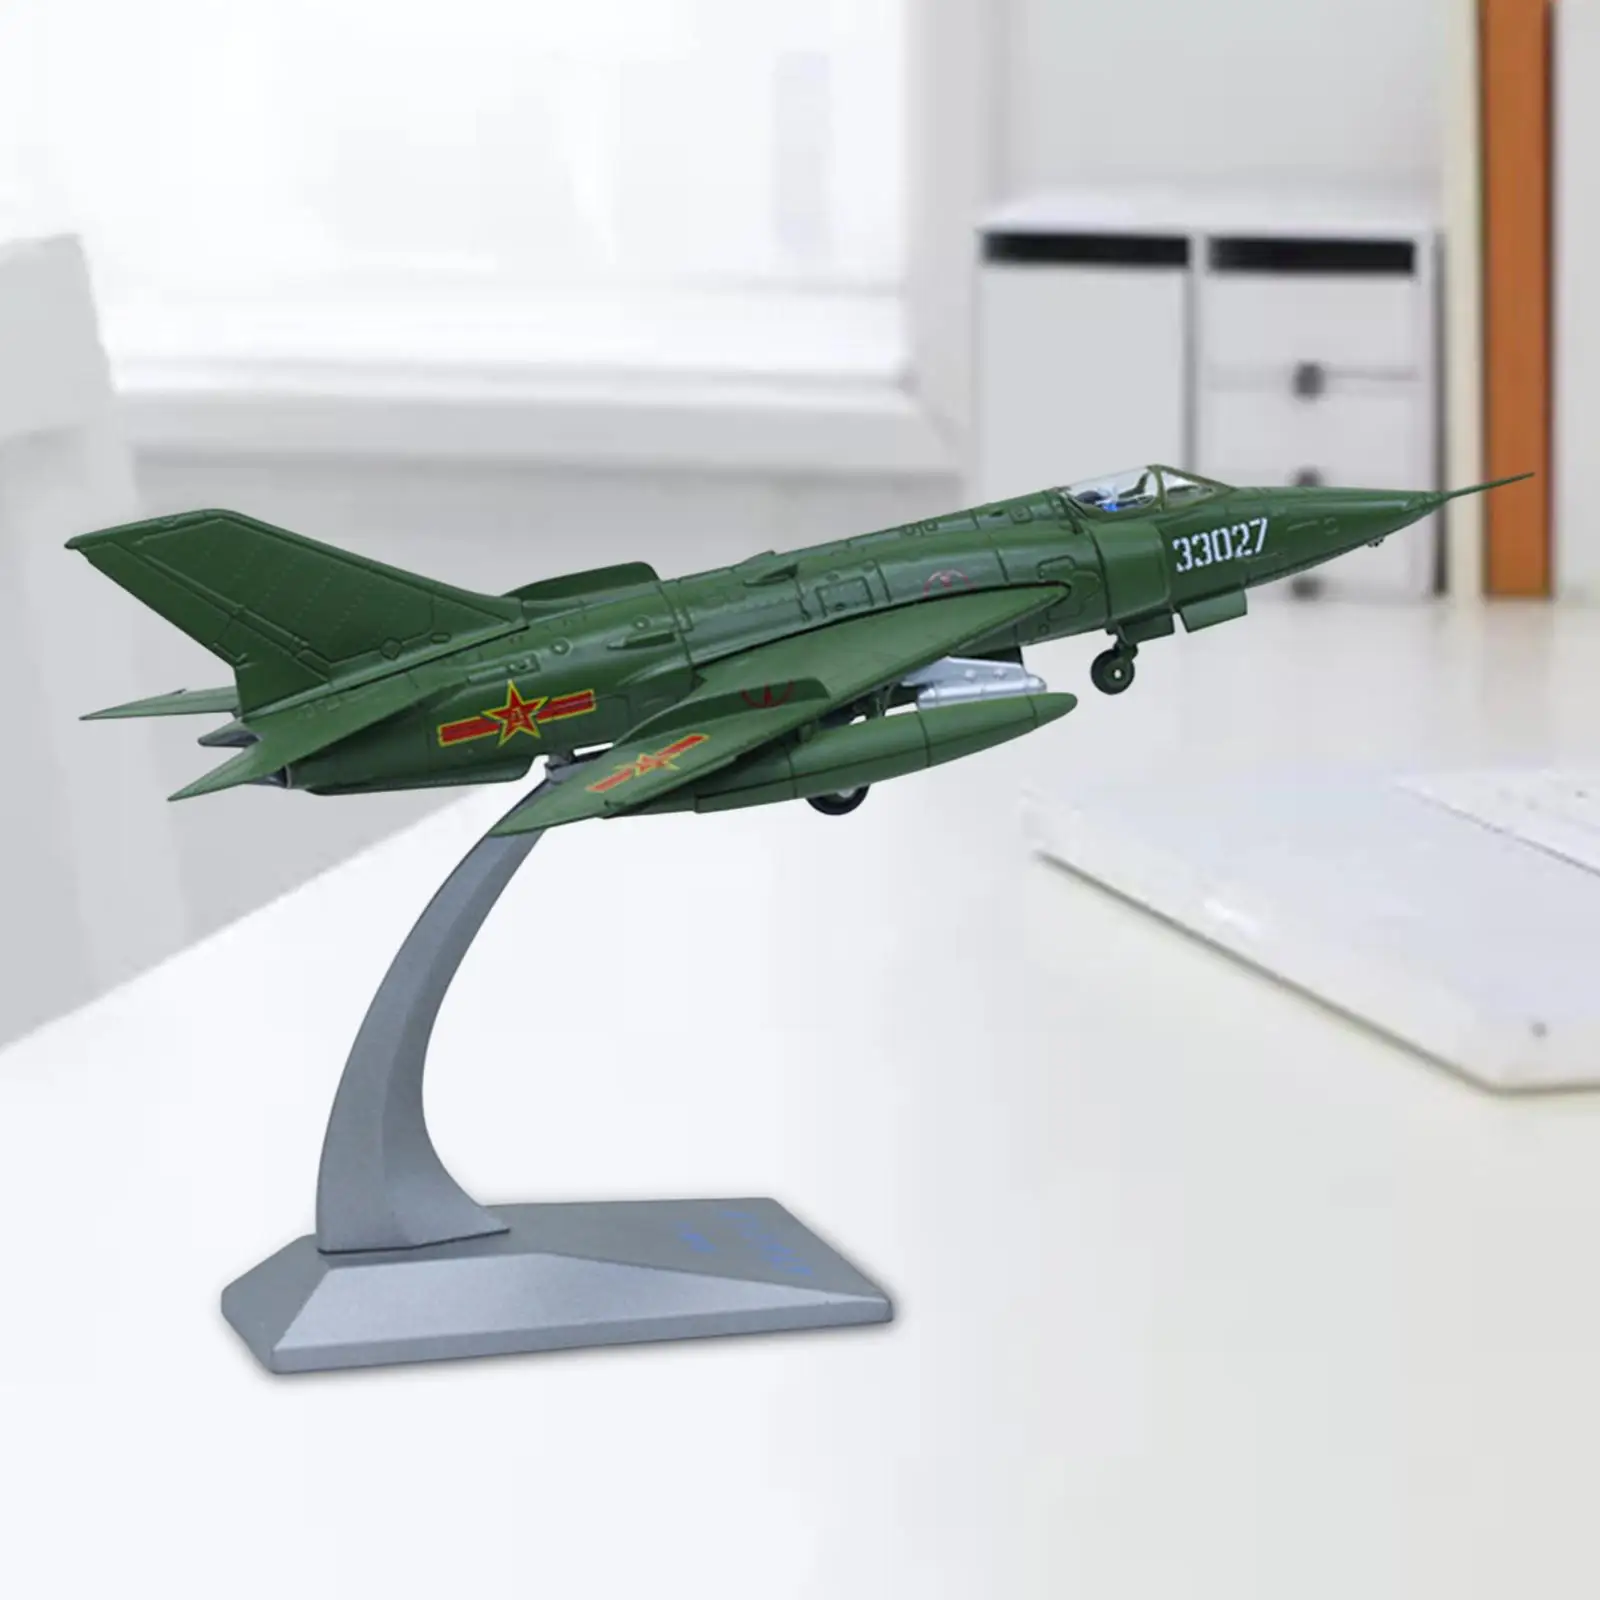 1:72 Aircraft Model Desktop Display Aviation Collectibles Fighter Airplane for Collection Fireplace Office Decor Holiday Gifts